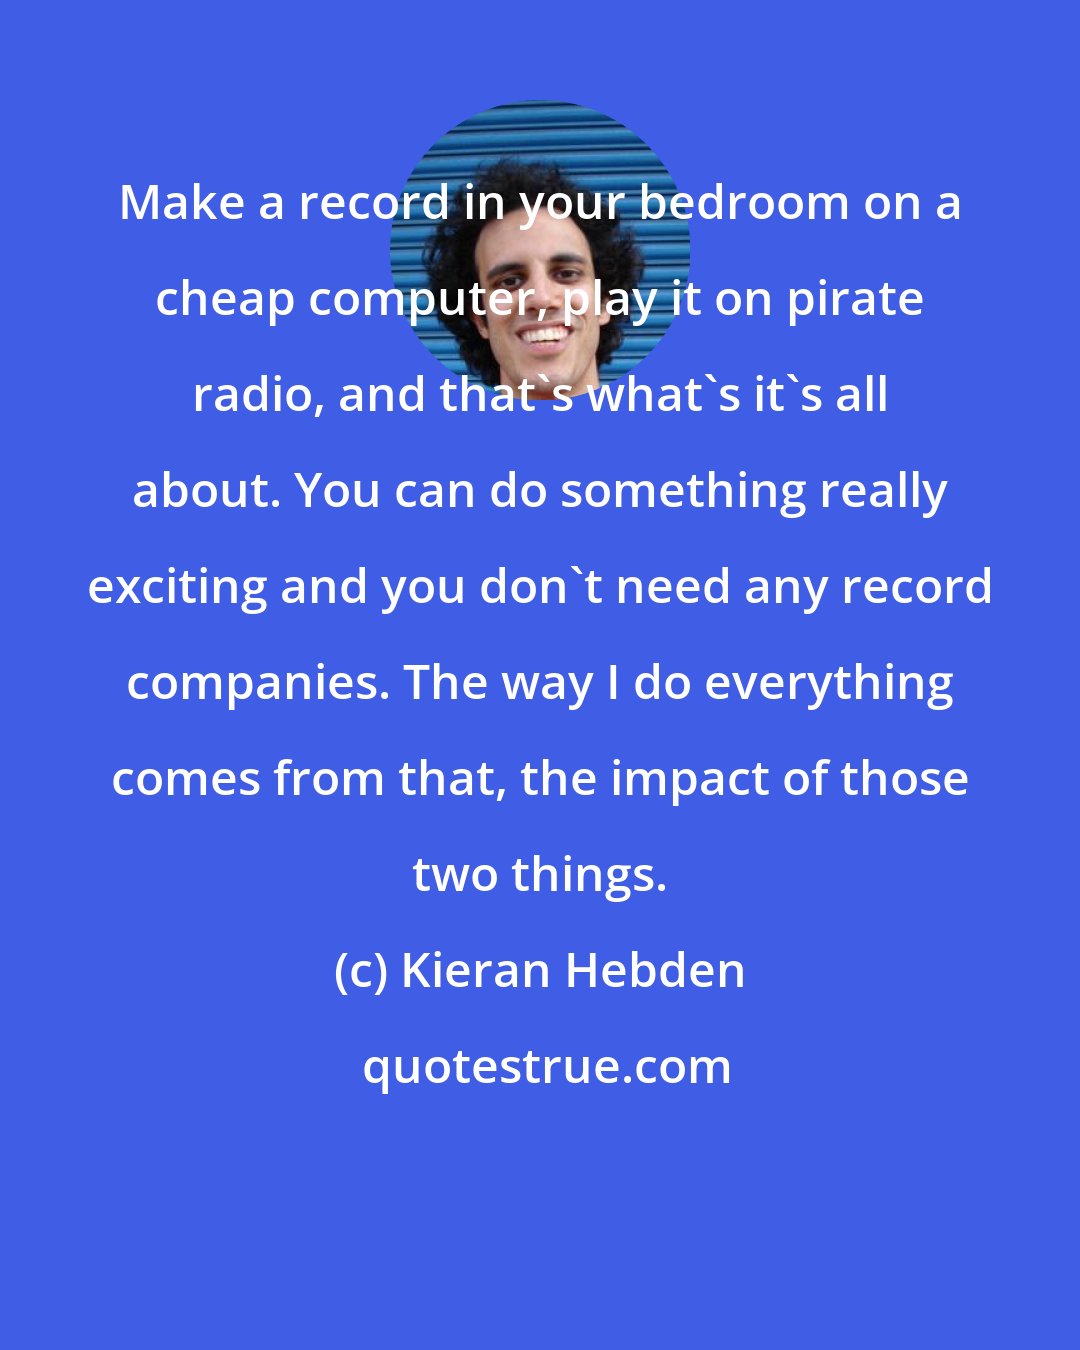 Kieran Hebden: Make a record in your bedroom on a cheap computer, play it on pirate radio, and that's what's it's all about. You can do something really exciting and you don't need any record companies. The way I do everything comes from that, the impact of those two things.